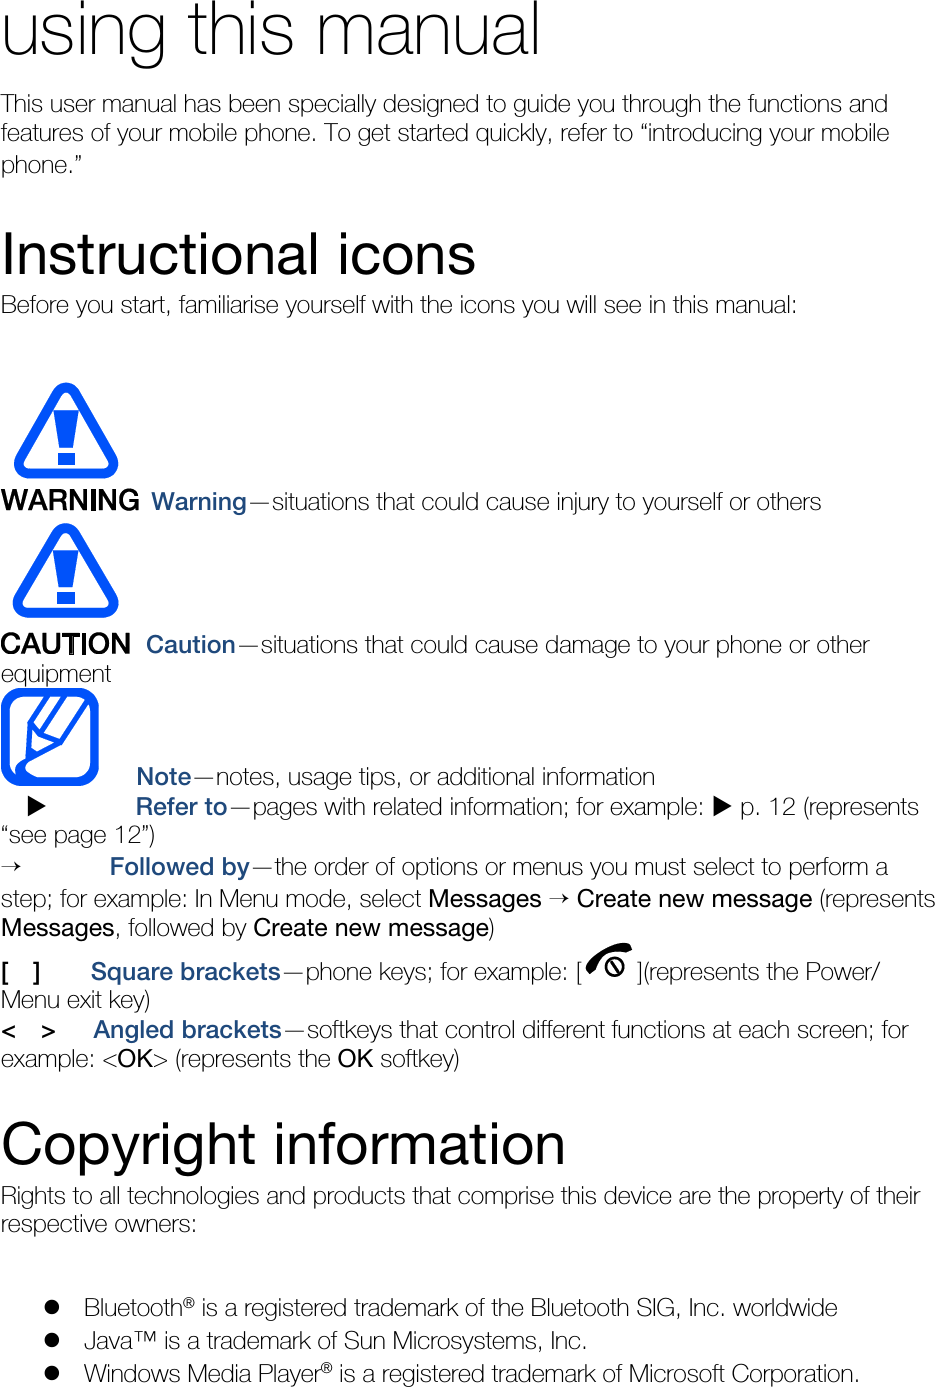   using this manual This user manual has been specially designed to guide you through the functions and features of your mobile phone. To get started quickly, refer to “introducing your mobile phone.”  Instructional icons Before you start, familiarise yourself with the icons you will see in this manual:     Warning—situations that could cause injury to yourself or others  Caution—situations that could cause damage to your phone or other equipment    Note—notes, usage tips, or additional information   X       Refer to—pages with related information; for example: X p. 12 (represents “see page 12”) →       Followed by—the order of options or menus you must select to perform a step; for example: In Menu mode, select Messages → Create new message (represents Messages, followed by Create new message) [  ]    Square brackets—phone keys; for example: [ ](represents the Power/ Menu exit key) &lt;  &gt;   Angled brackets—softkeys that control different functions at each screen; for example: &lt;OK&gt; (represents the OK softkey)  Copyright information Rights to all technologies and products that comprise this device are the property of their respective owners:  z Bluetooth® is a registered trademark of the Bluetooth SIG, Inc. worldwide z Java™ is a trademark of Sun Microsystems, Inc. z Windows Media Player® is a registered trademark of Microsoft Corporation. 